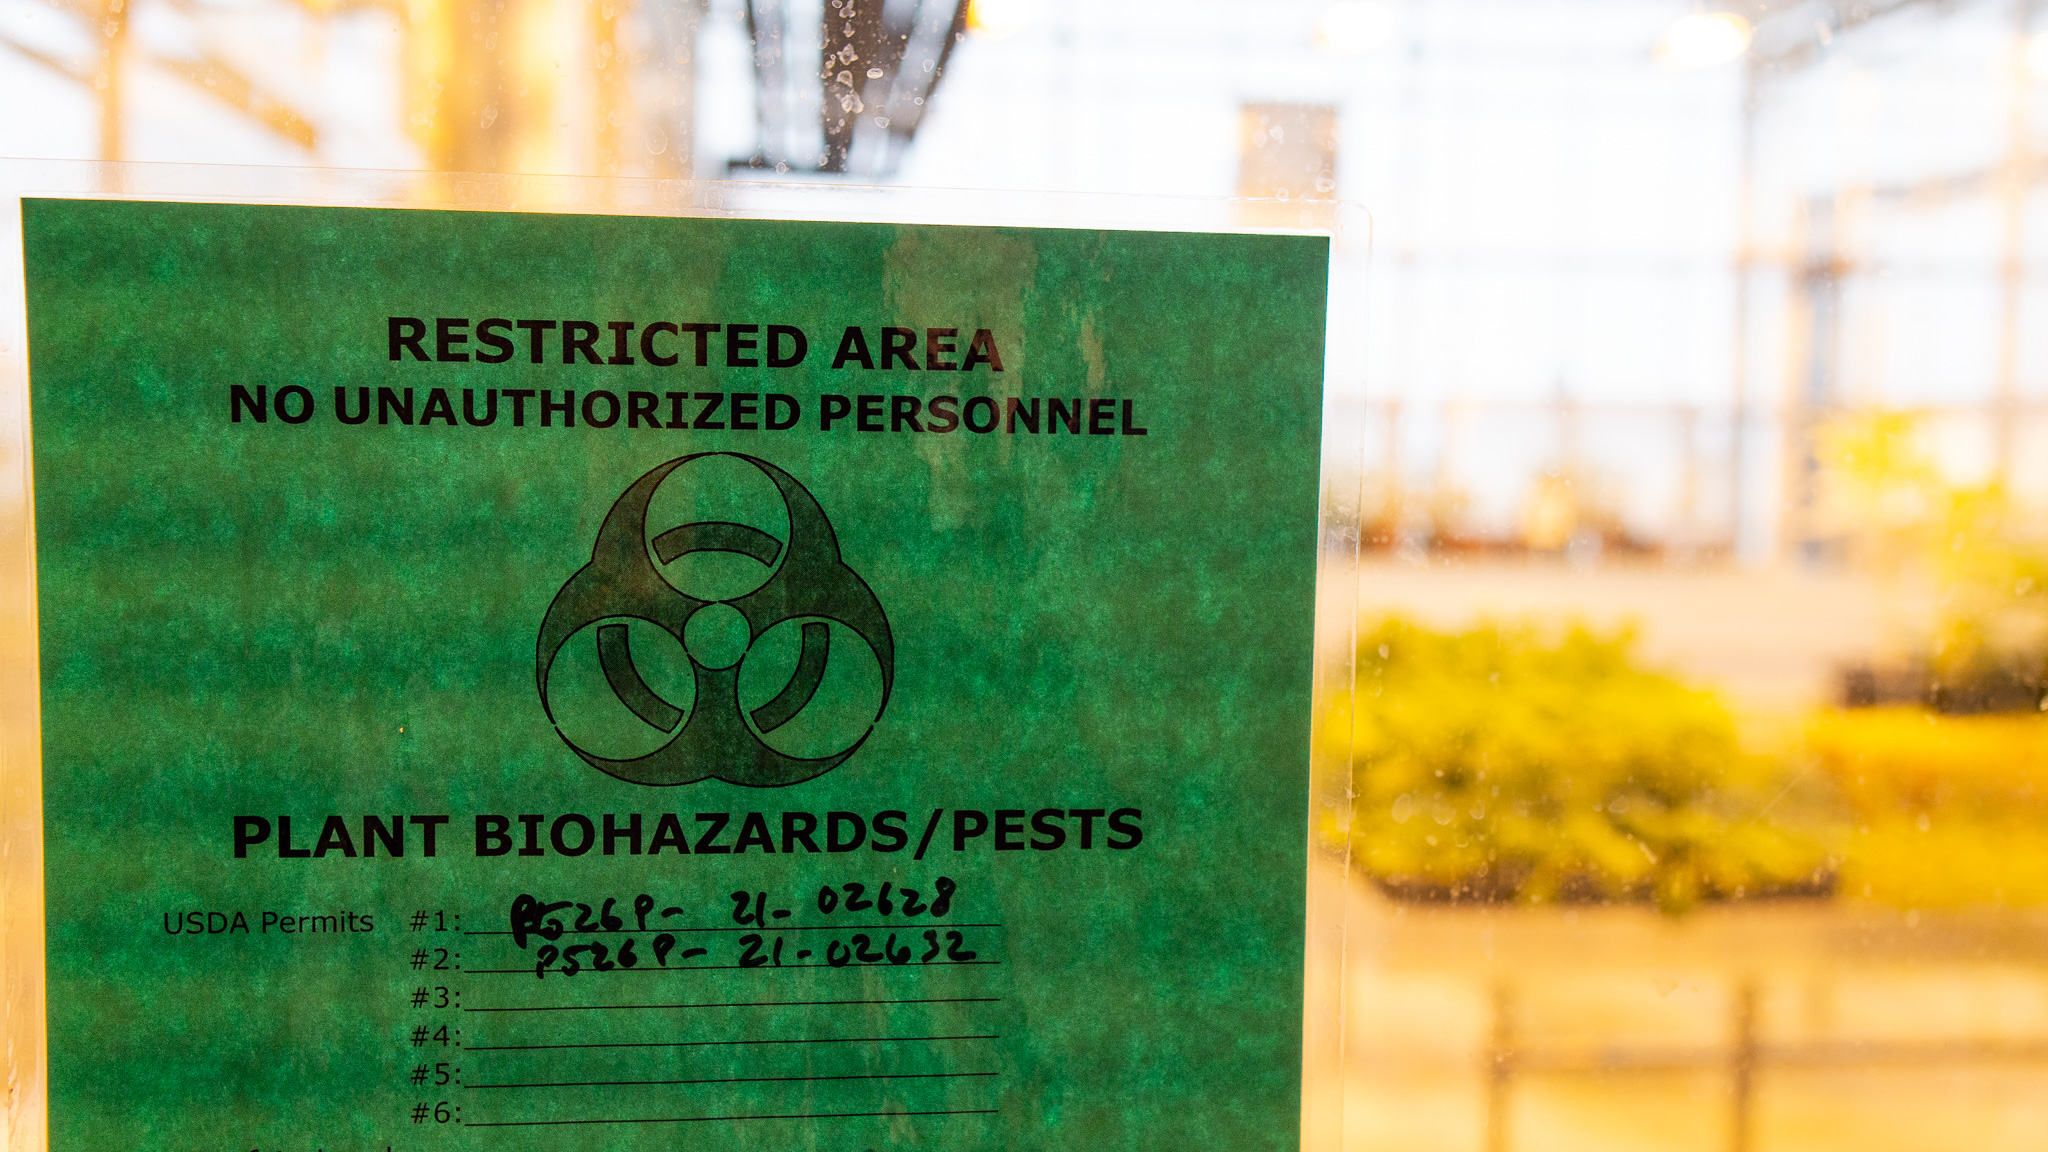 Example of plant biohazard materials signage